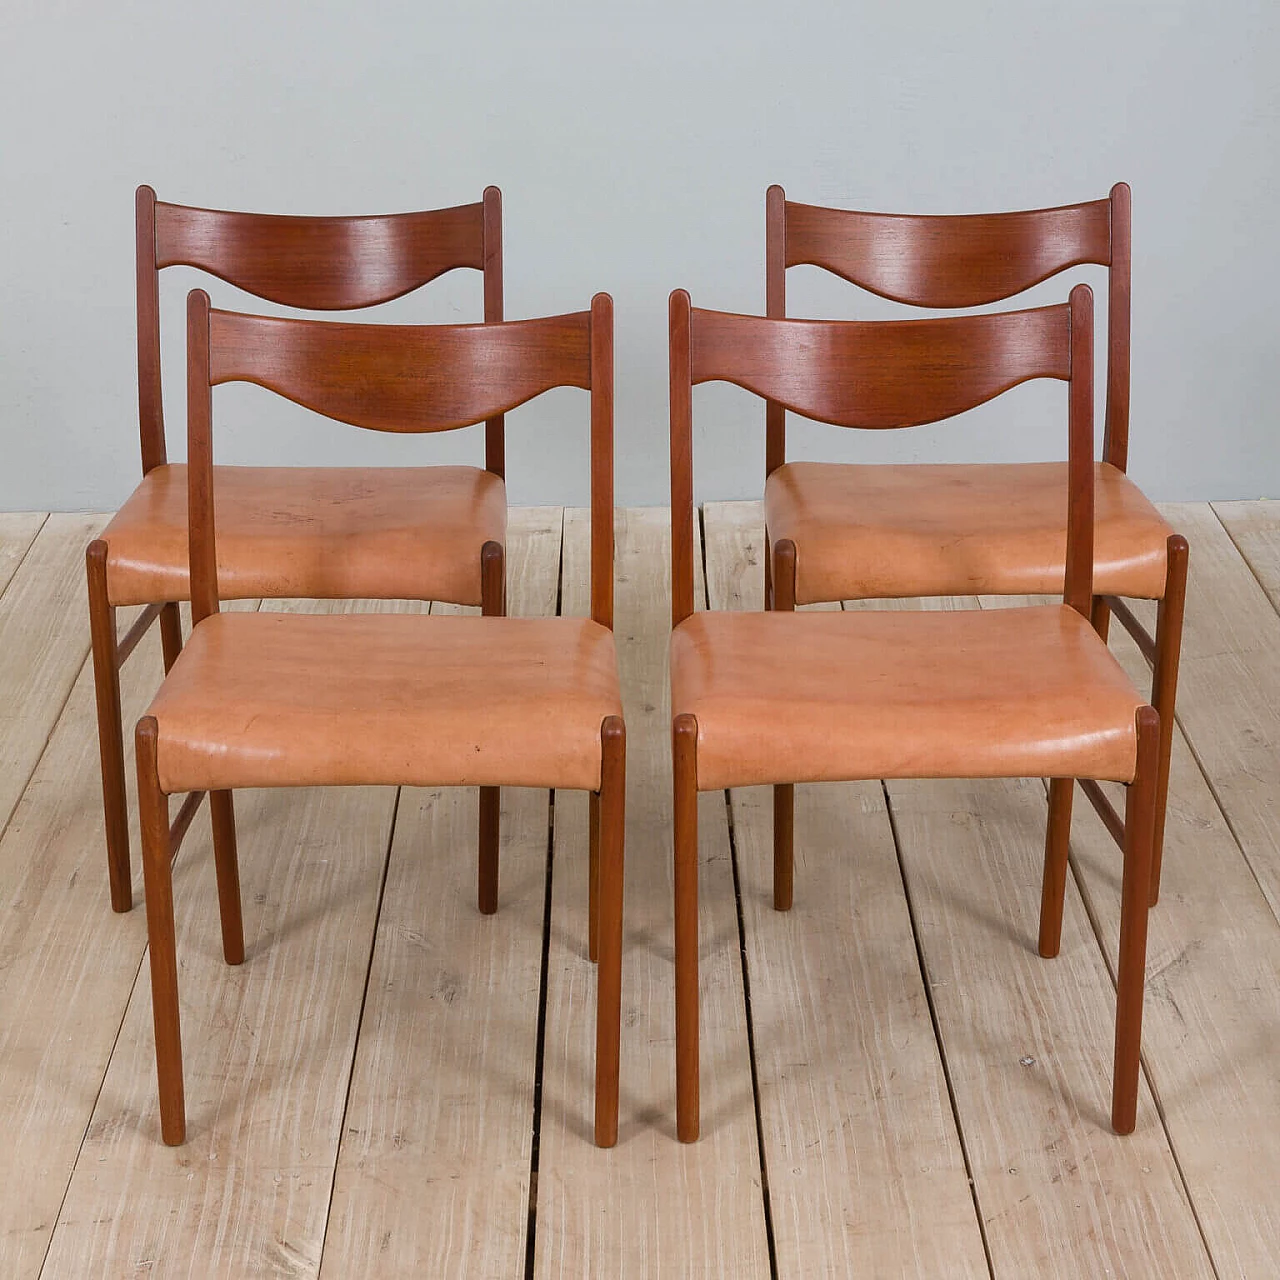 4 GS60 chairs in teak and leather by Arne Wahl Iversen for Glyngøre Stolefabrik, 60s 14